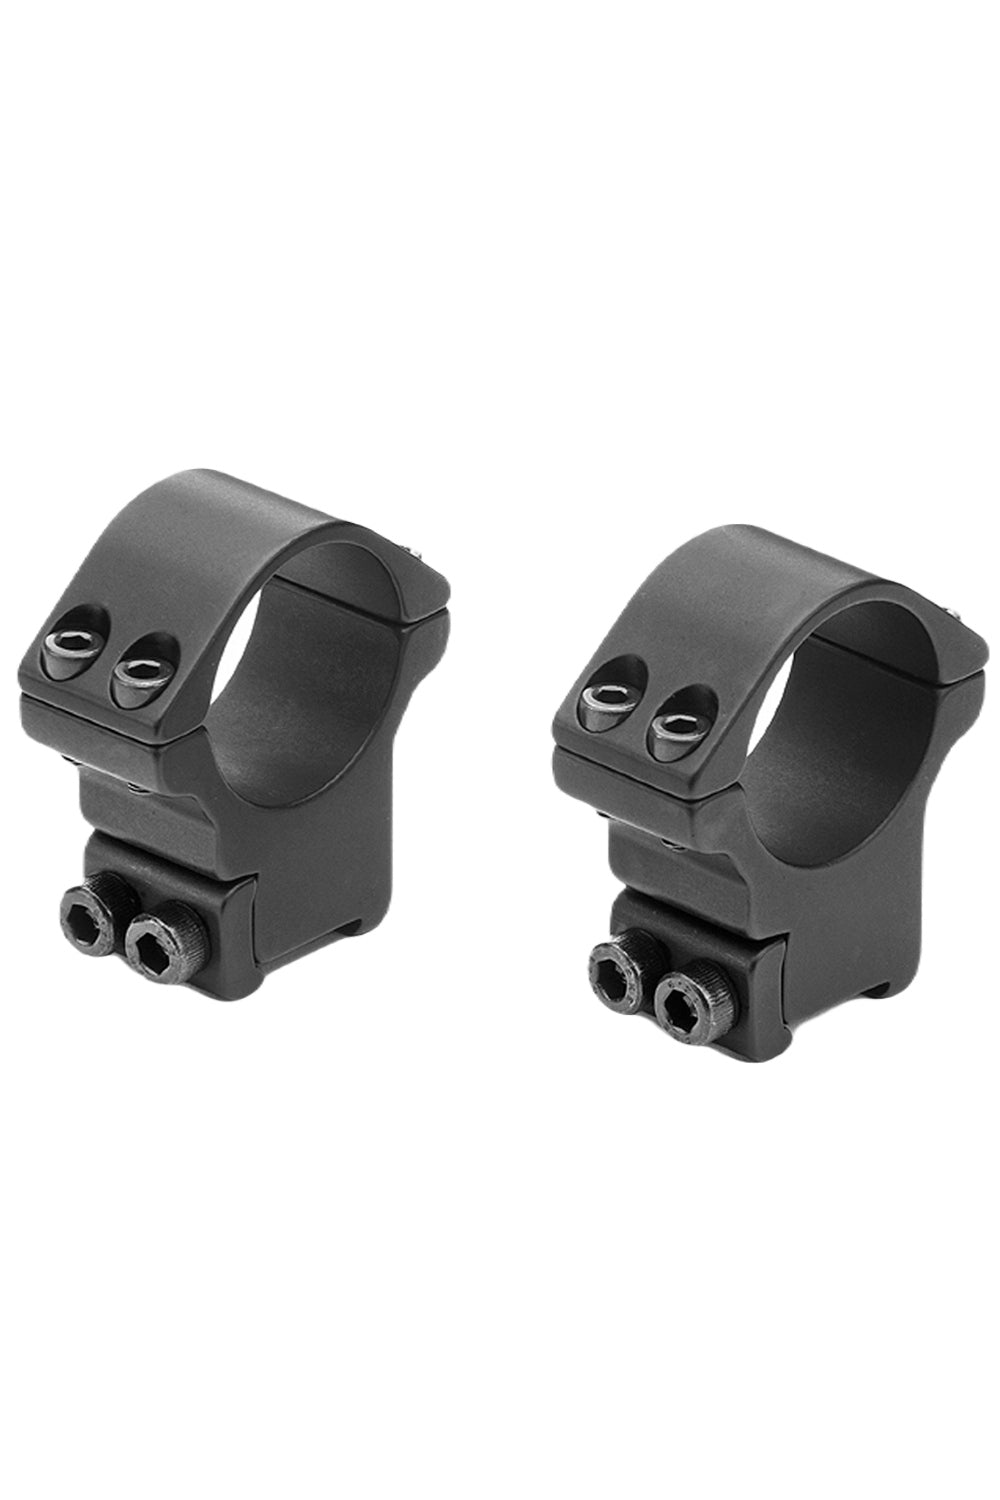 Bisley Two Piece High 30mm Mounts for 15mm CZ527/fox